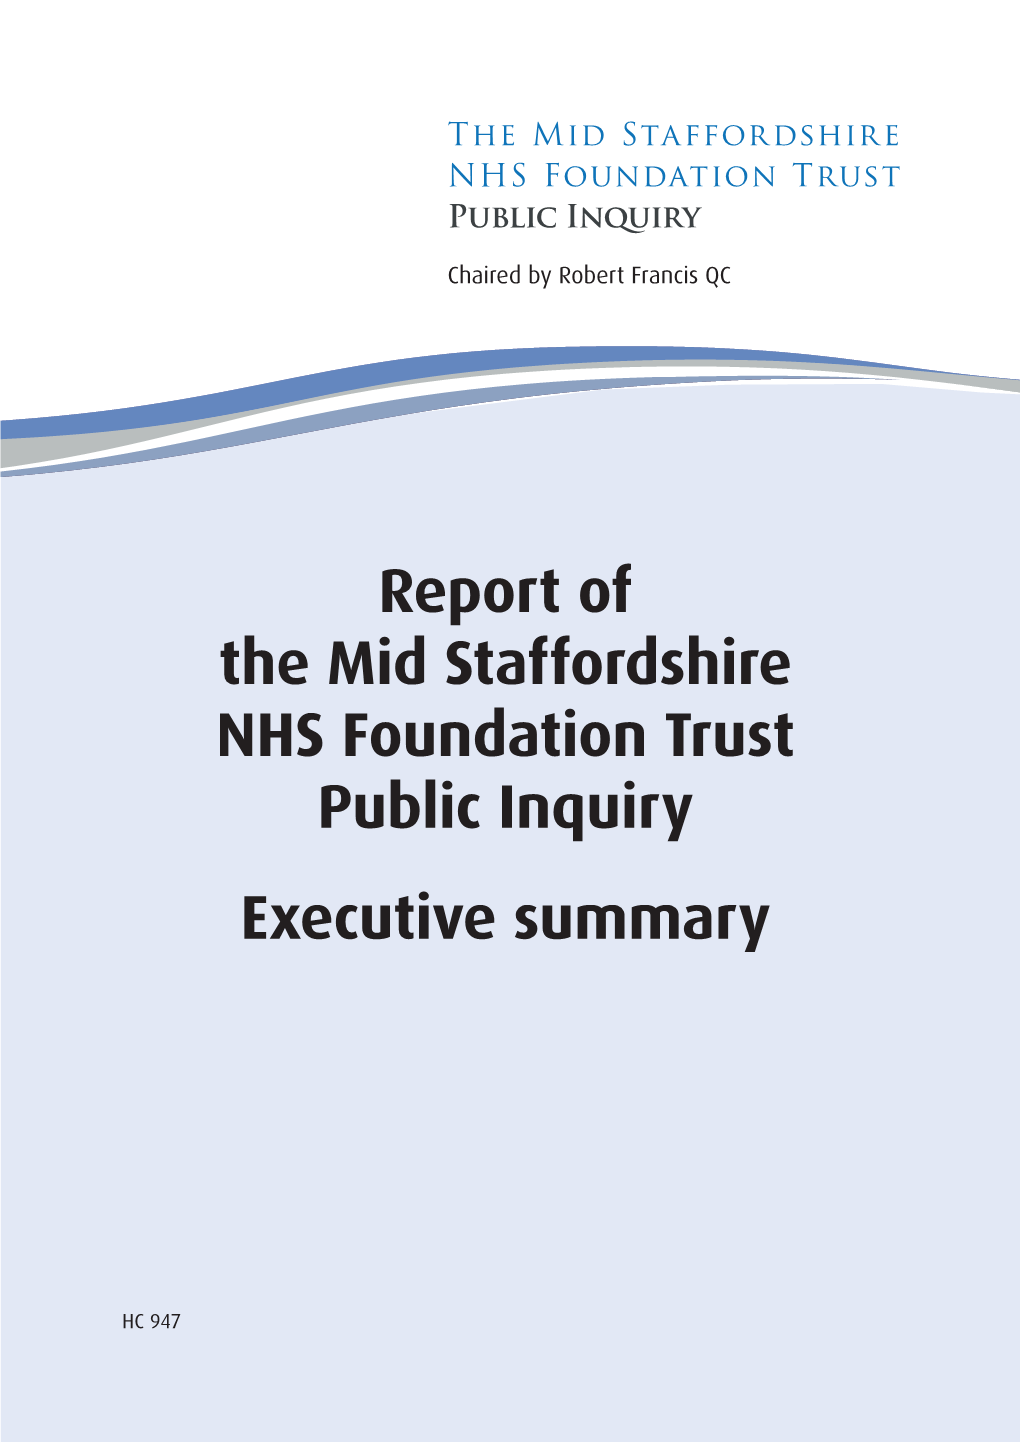 Report of the Mid Staffordshire NHS Foundation Trust Public Inquiry Executive Summary